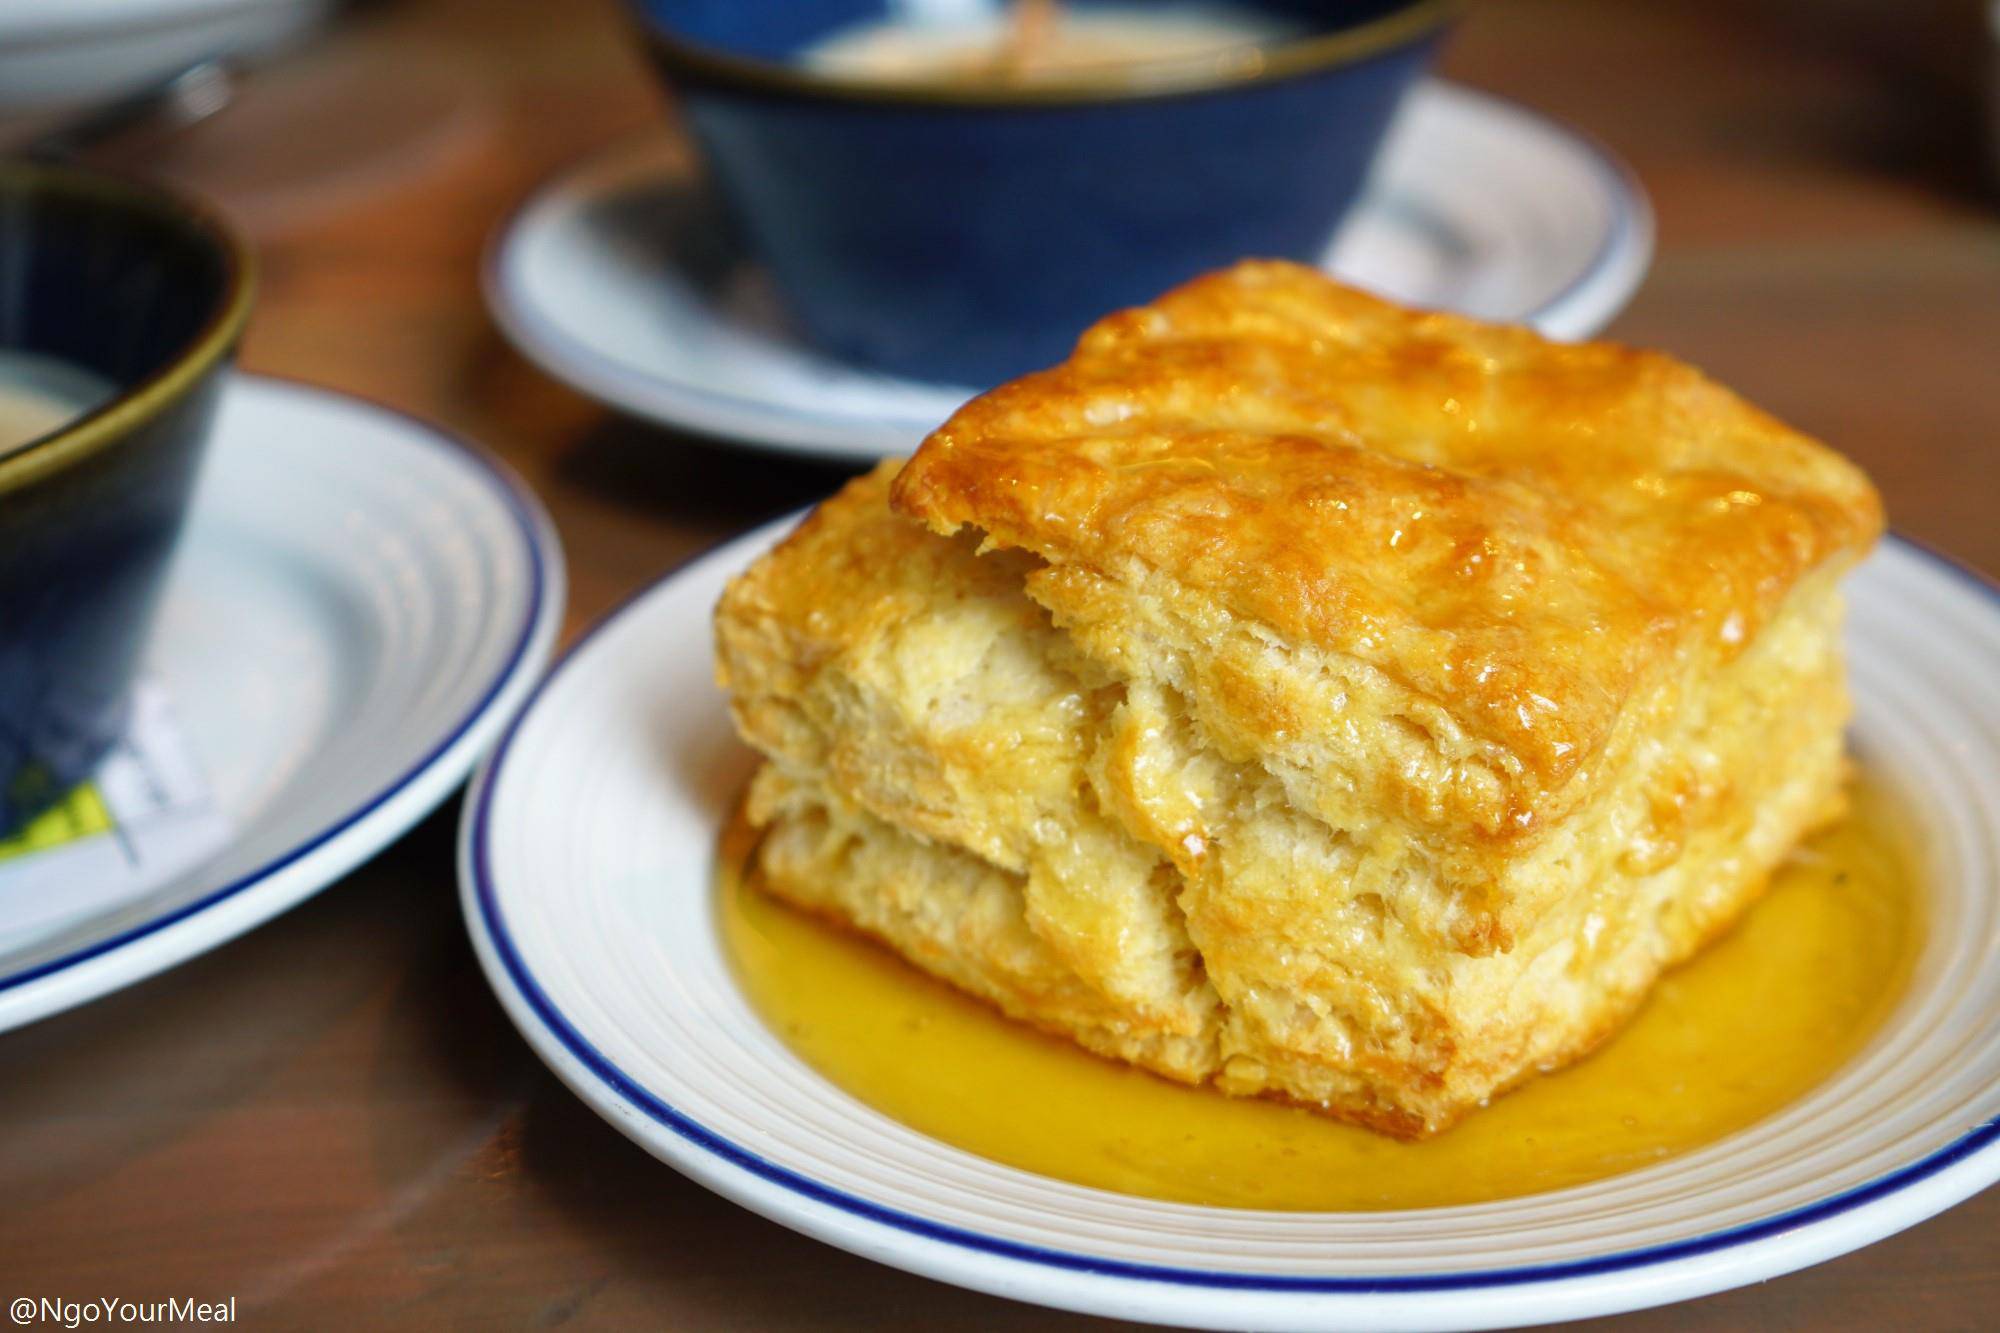 Buttermilk Biscuit at Island Creek Oyster Bar in Boston